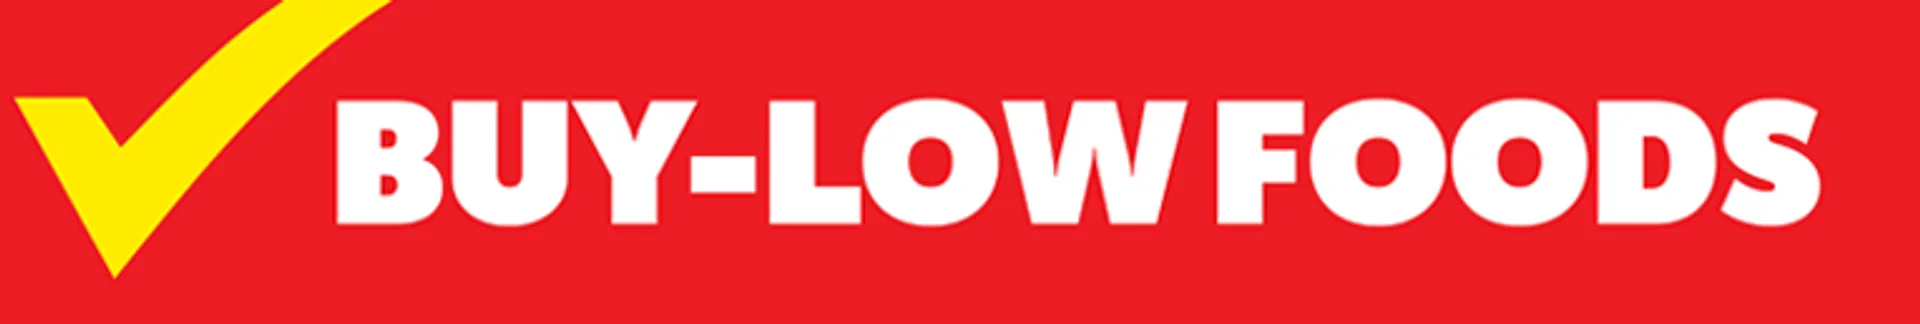 BUY-LOW FOODS logo. Current weekly ad